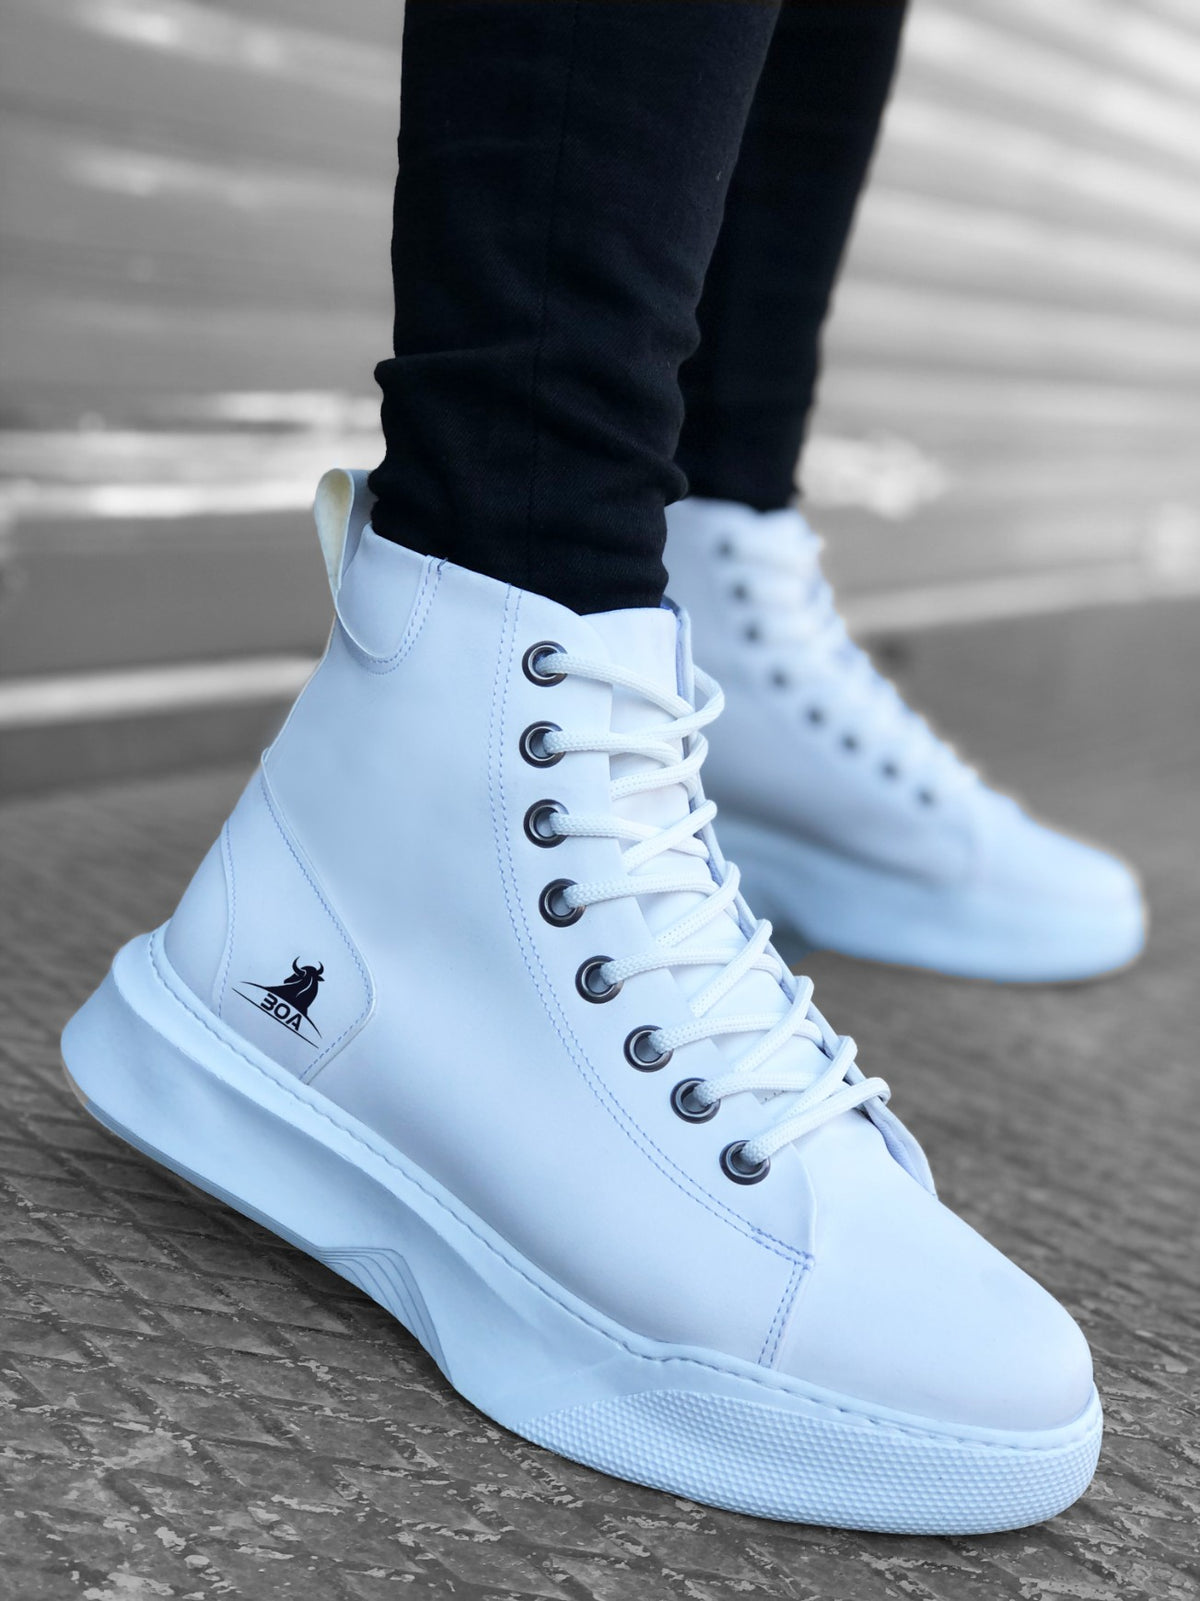 BA0155 Lace-Up Men's High Sole White Sport Boots - STREETMODE ™